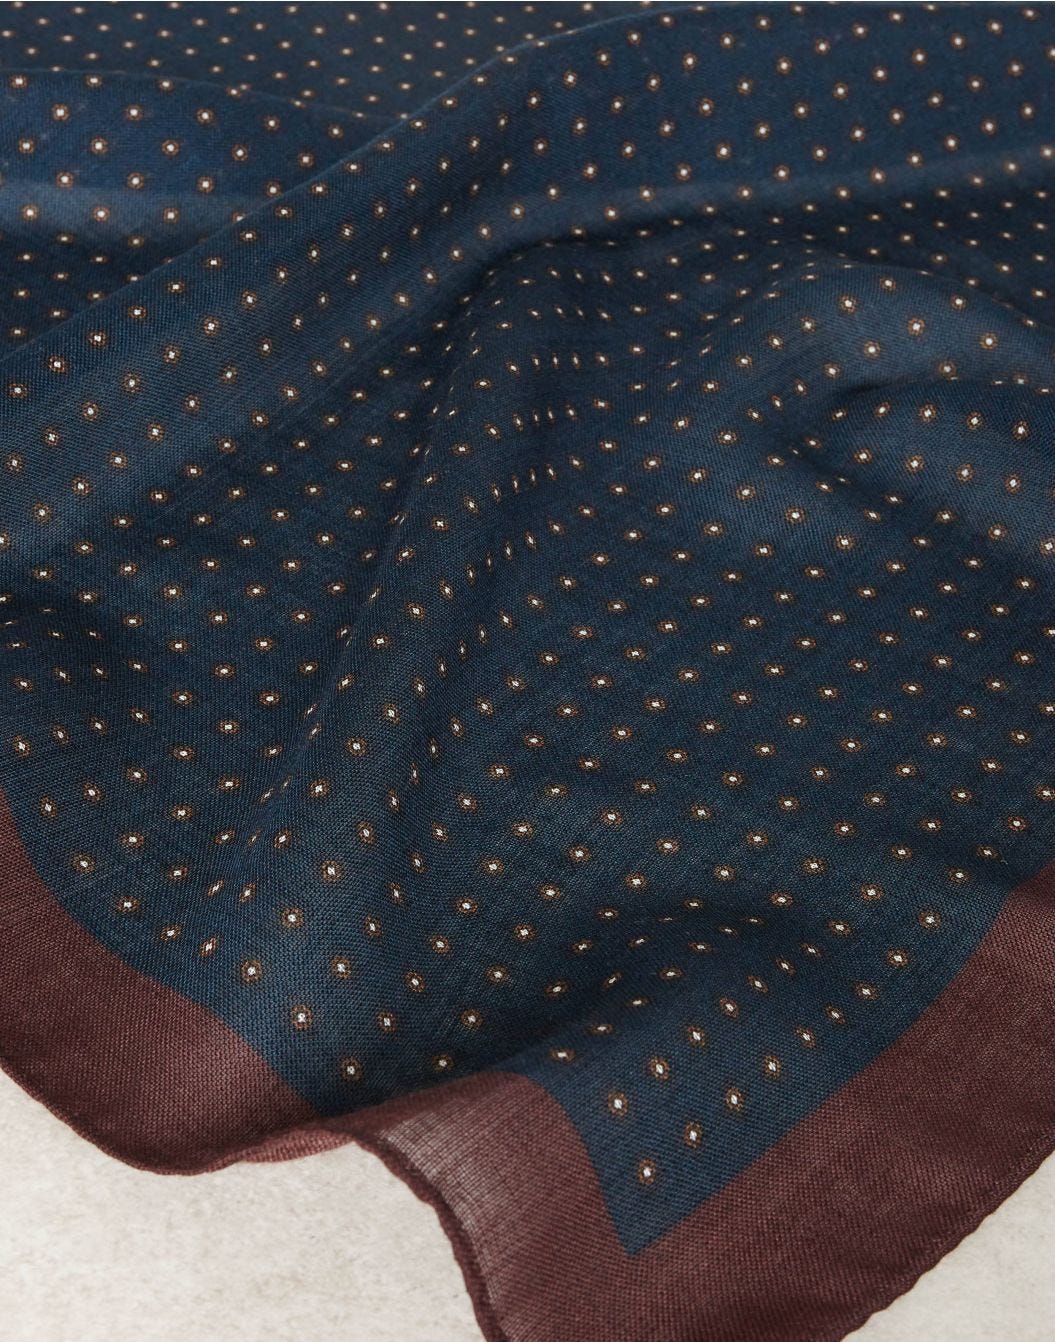 Gauzy-wool scarf in a blue-and-brown pattern